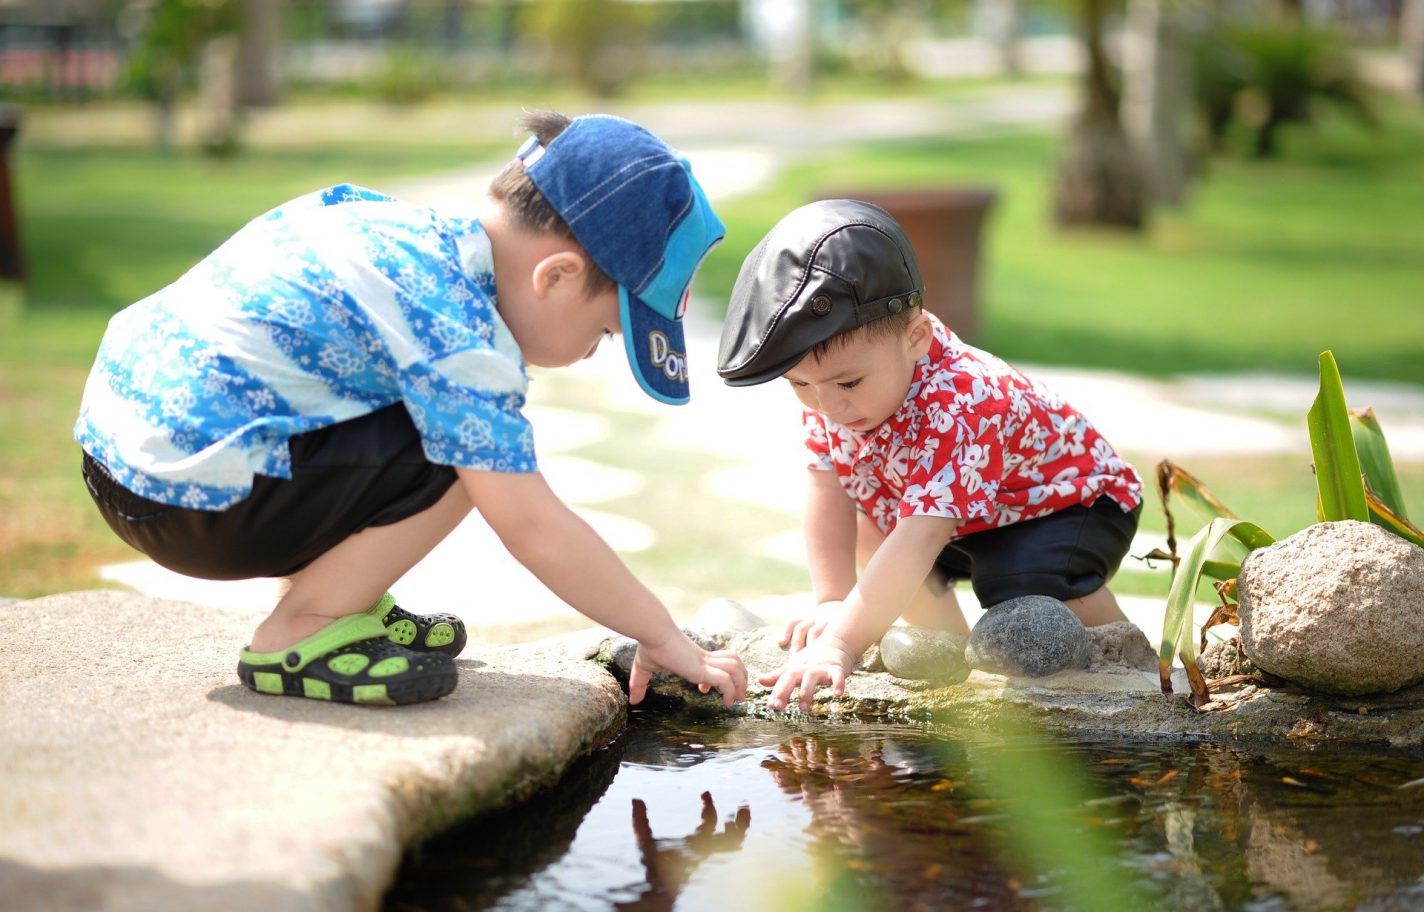 This shows two little boys playing in a stream